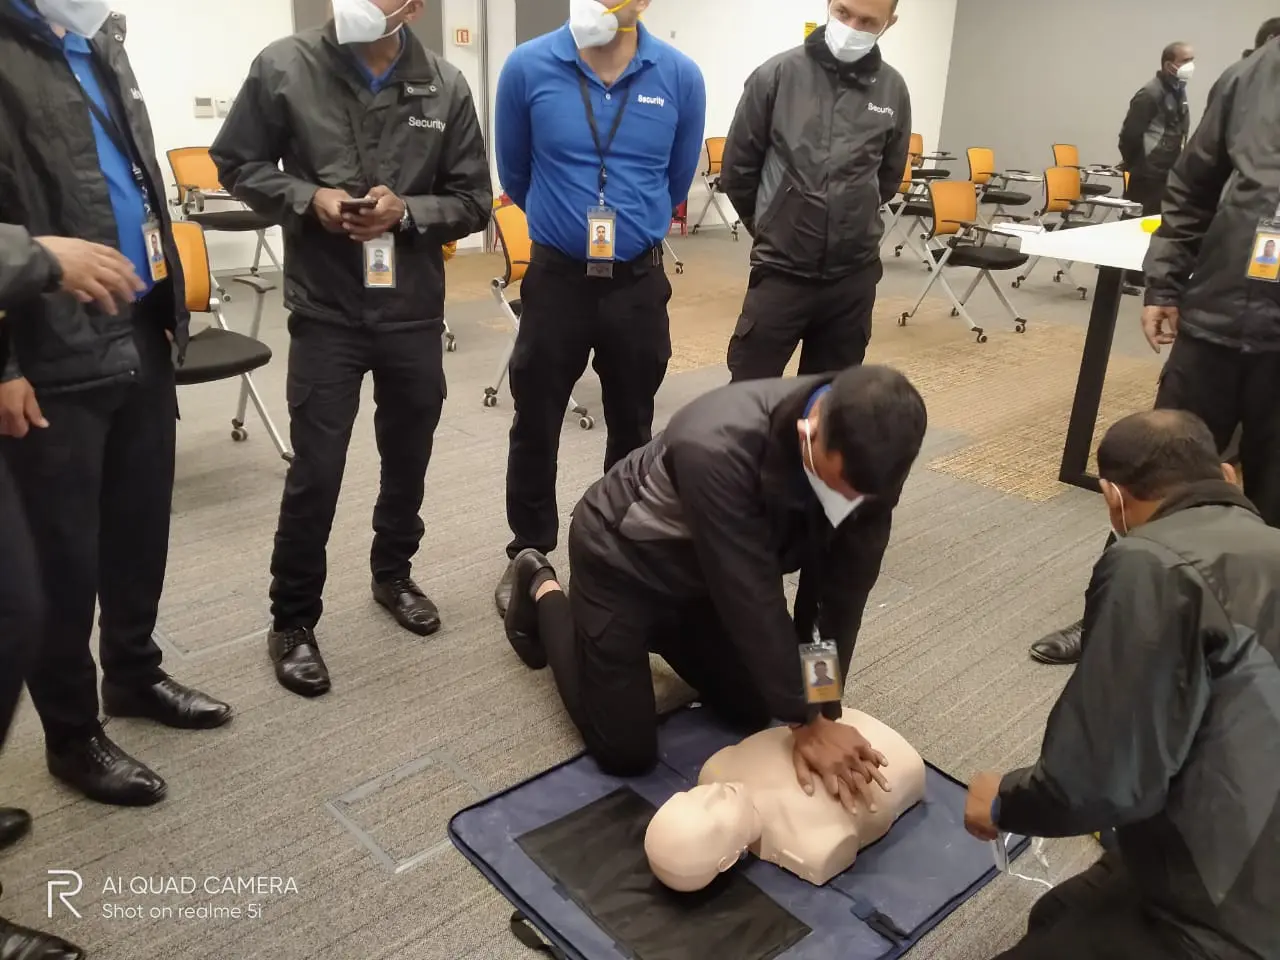 First Aid Heart Saver Course Training @ Google